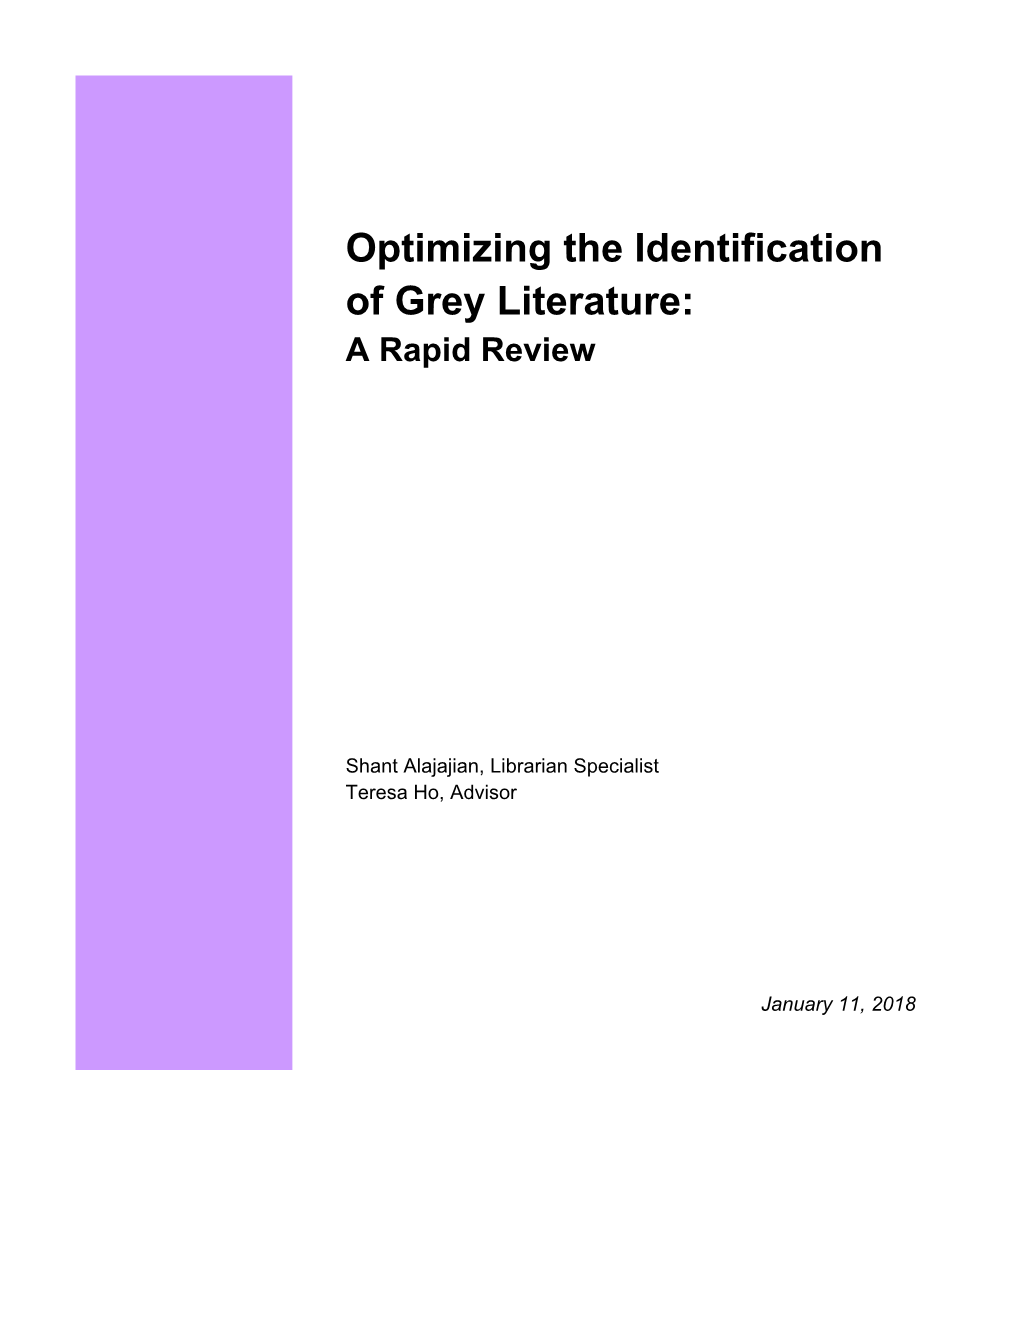 Optimizing the Identification of Grey Literature: a Rapid Review